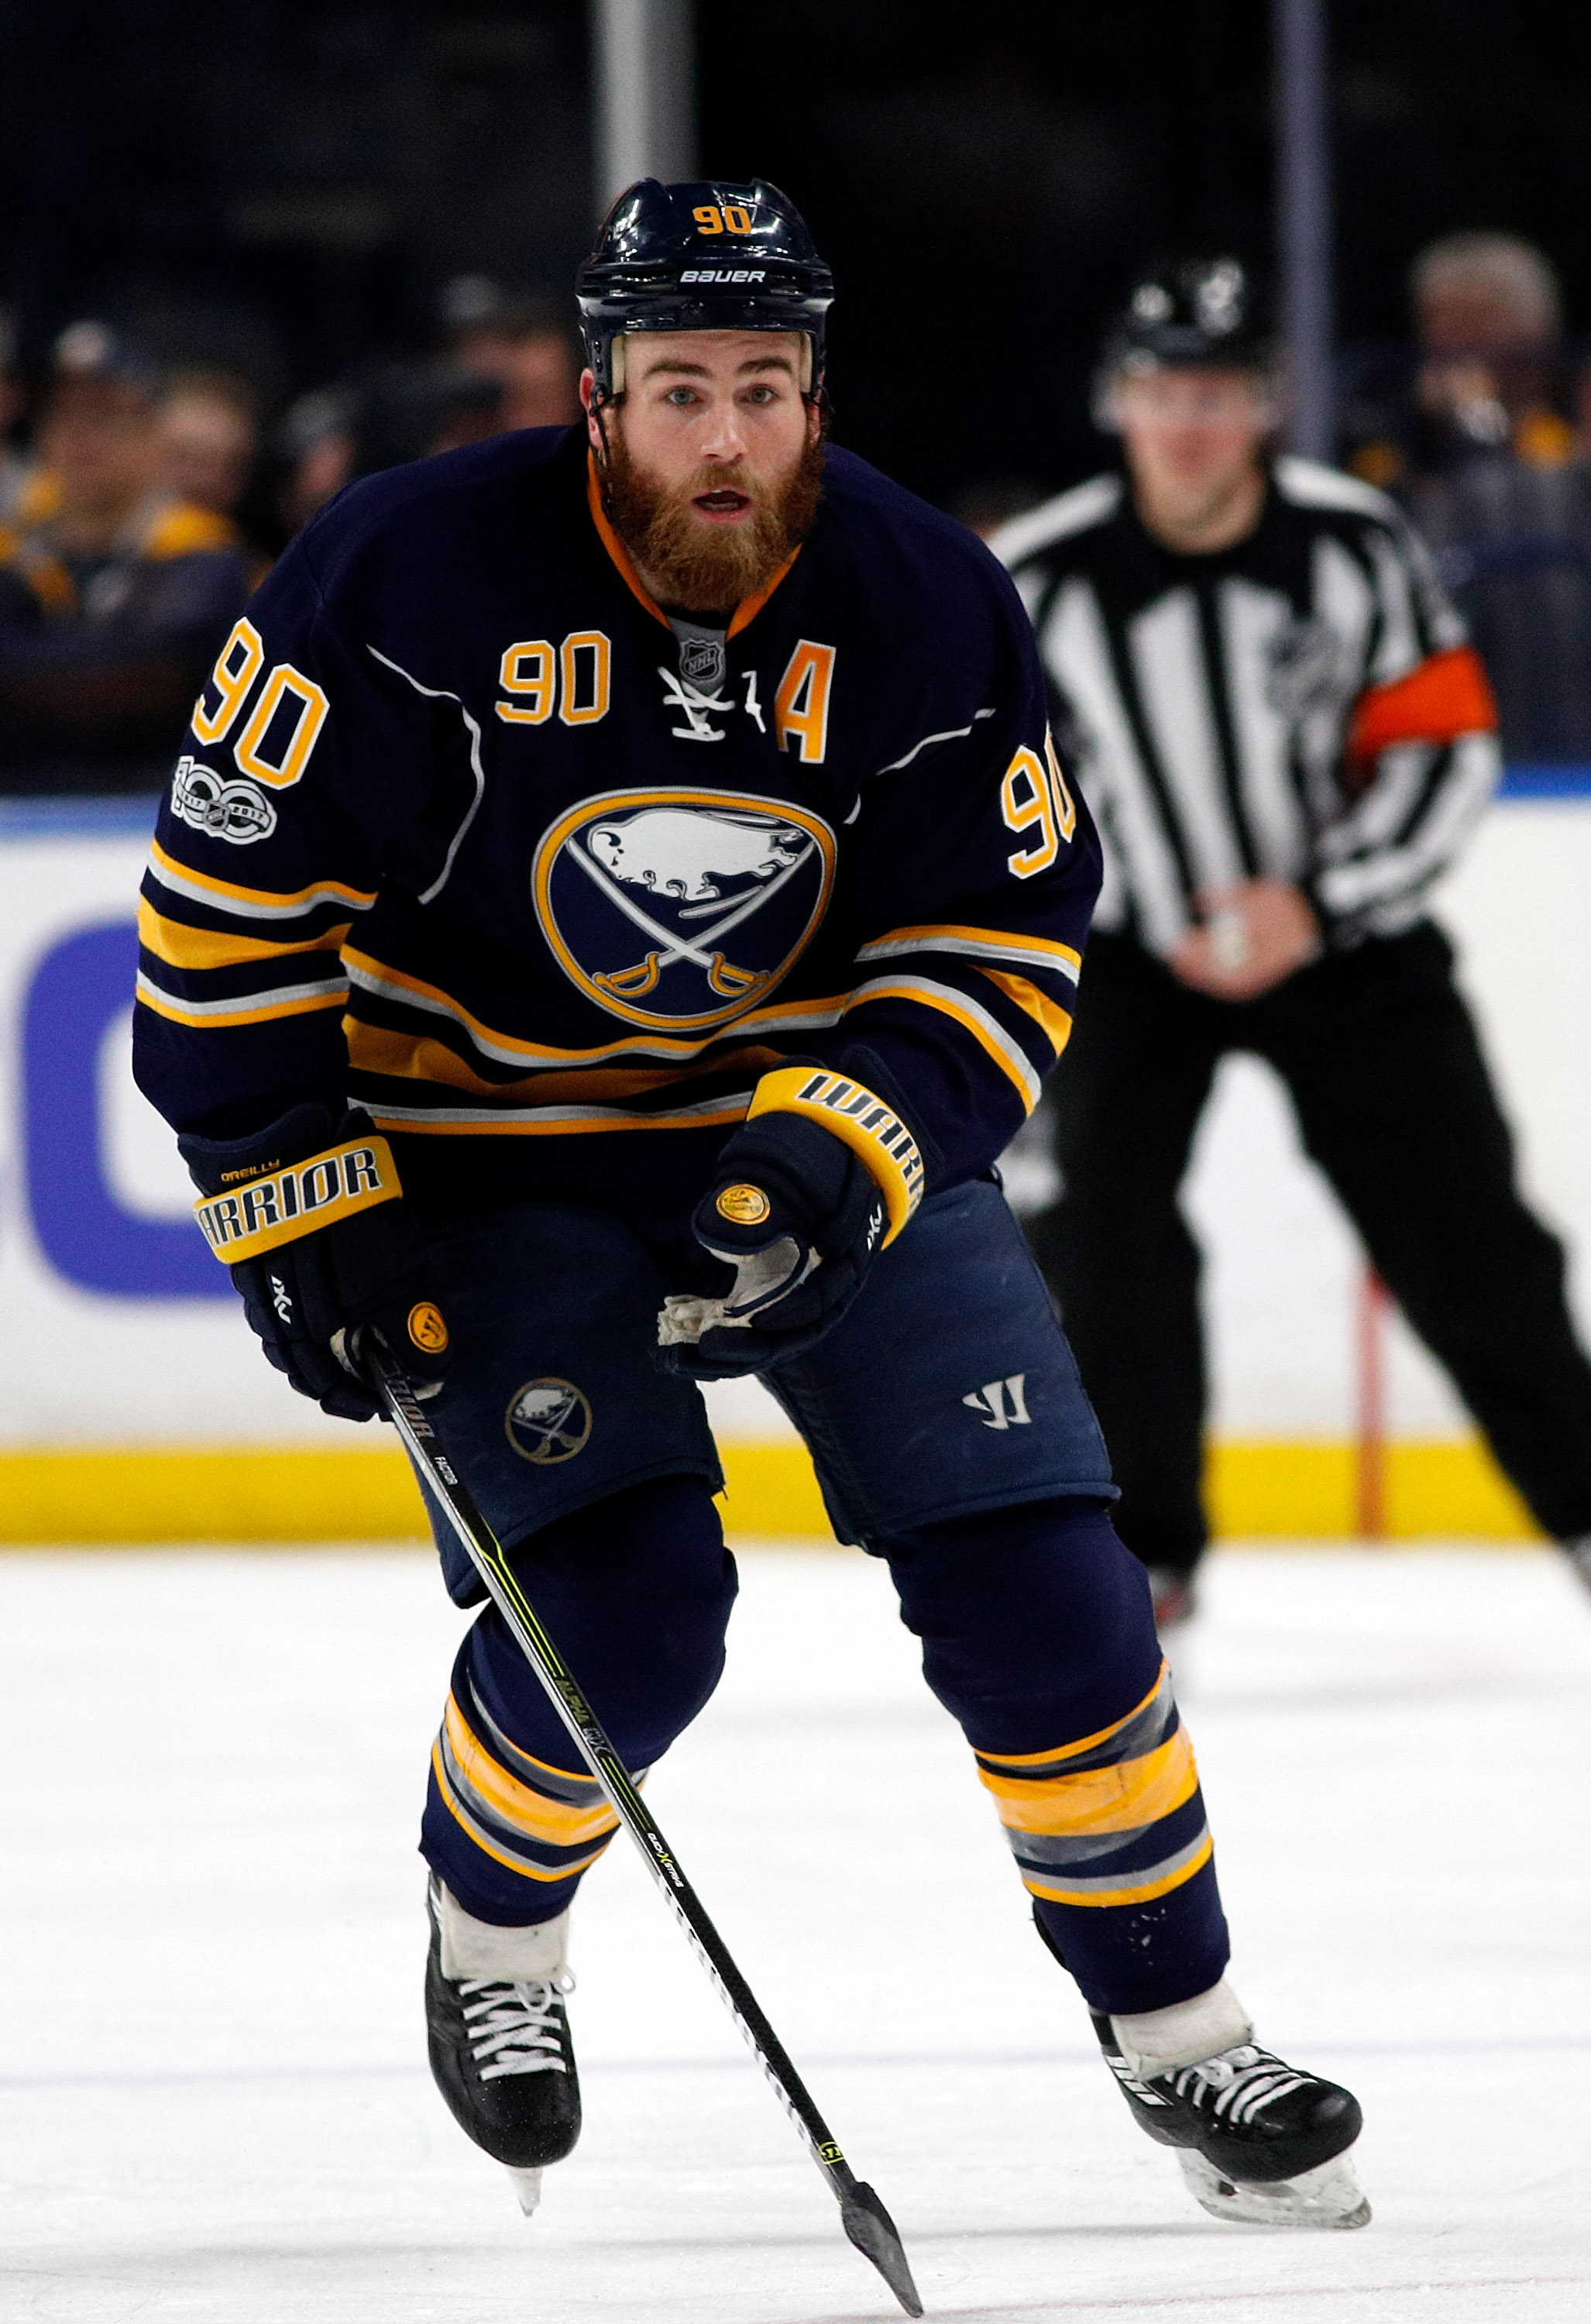 Ryan O'Reilly Sabres jersey